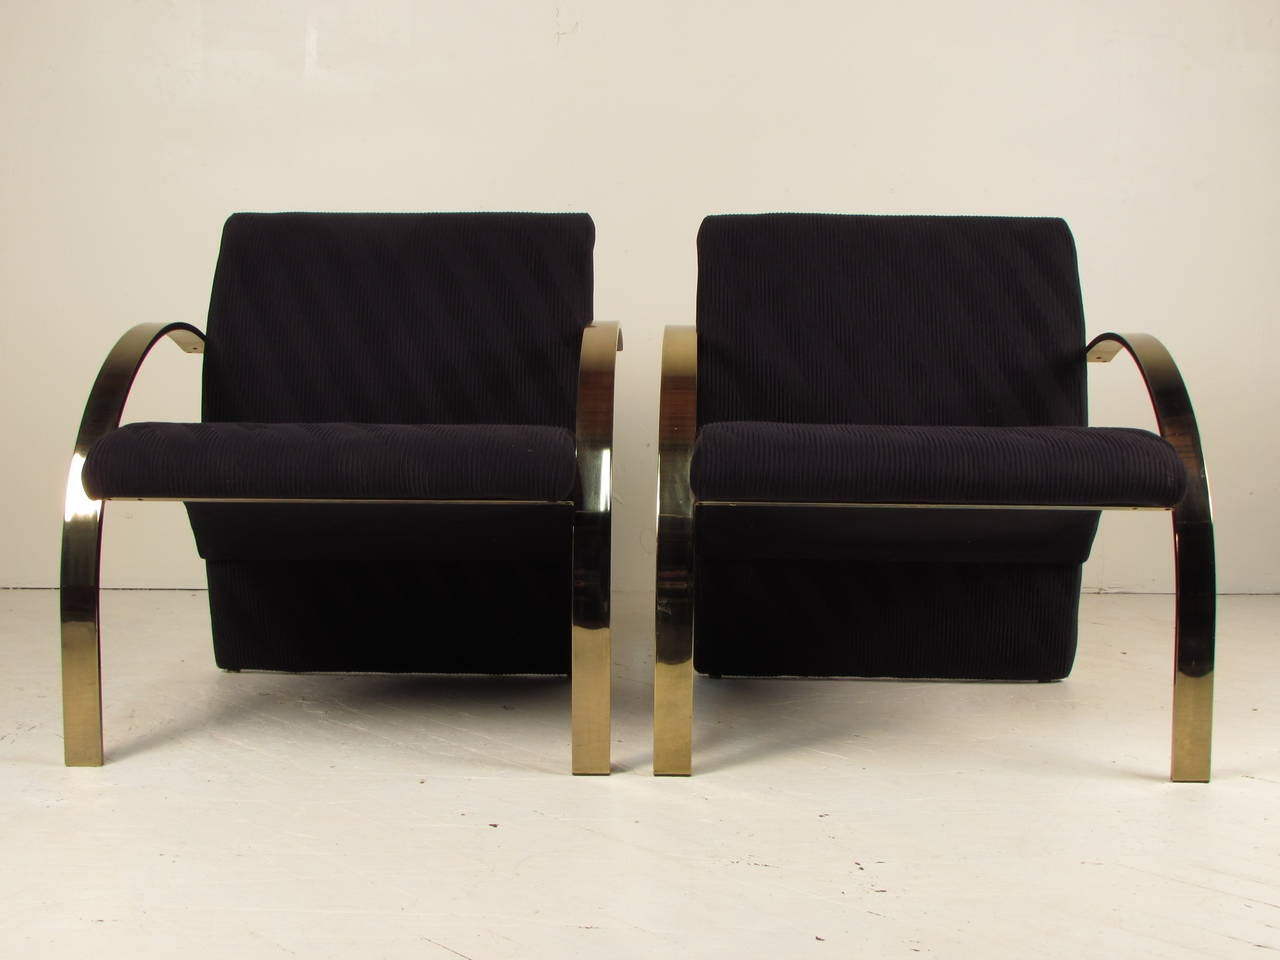 American Pair of Dramatic Sculptural Brass Lounge Chairs by Directional